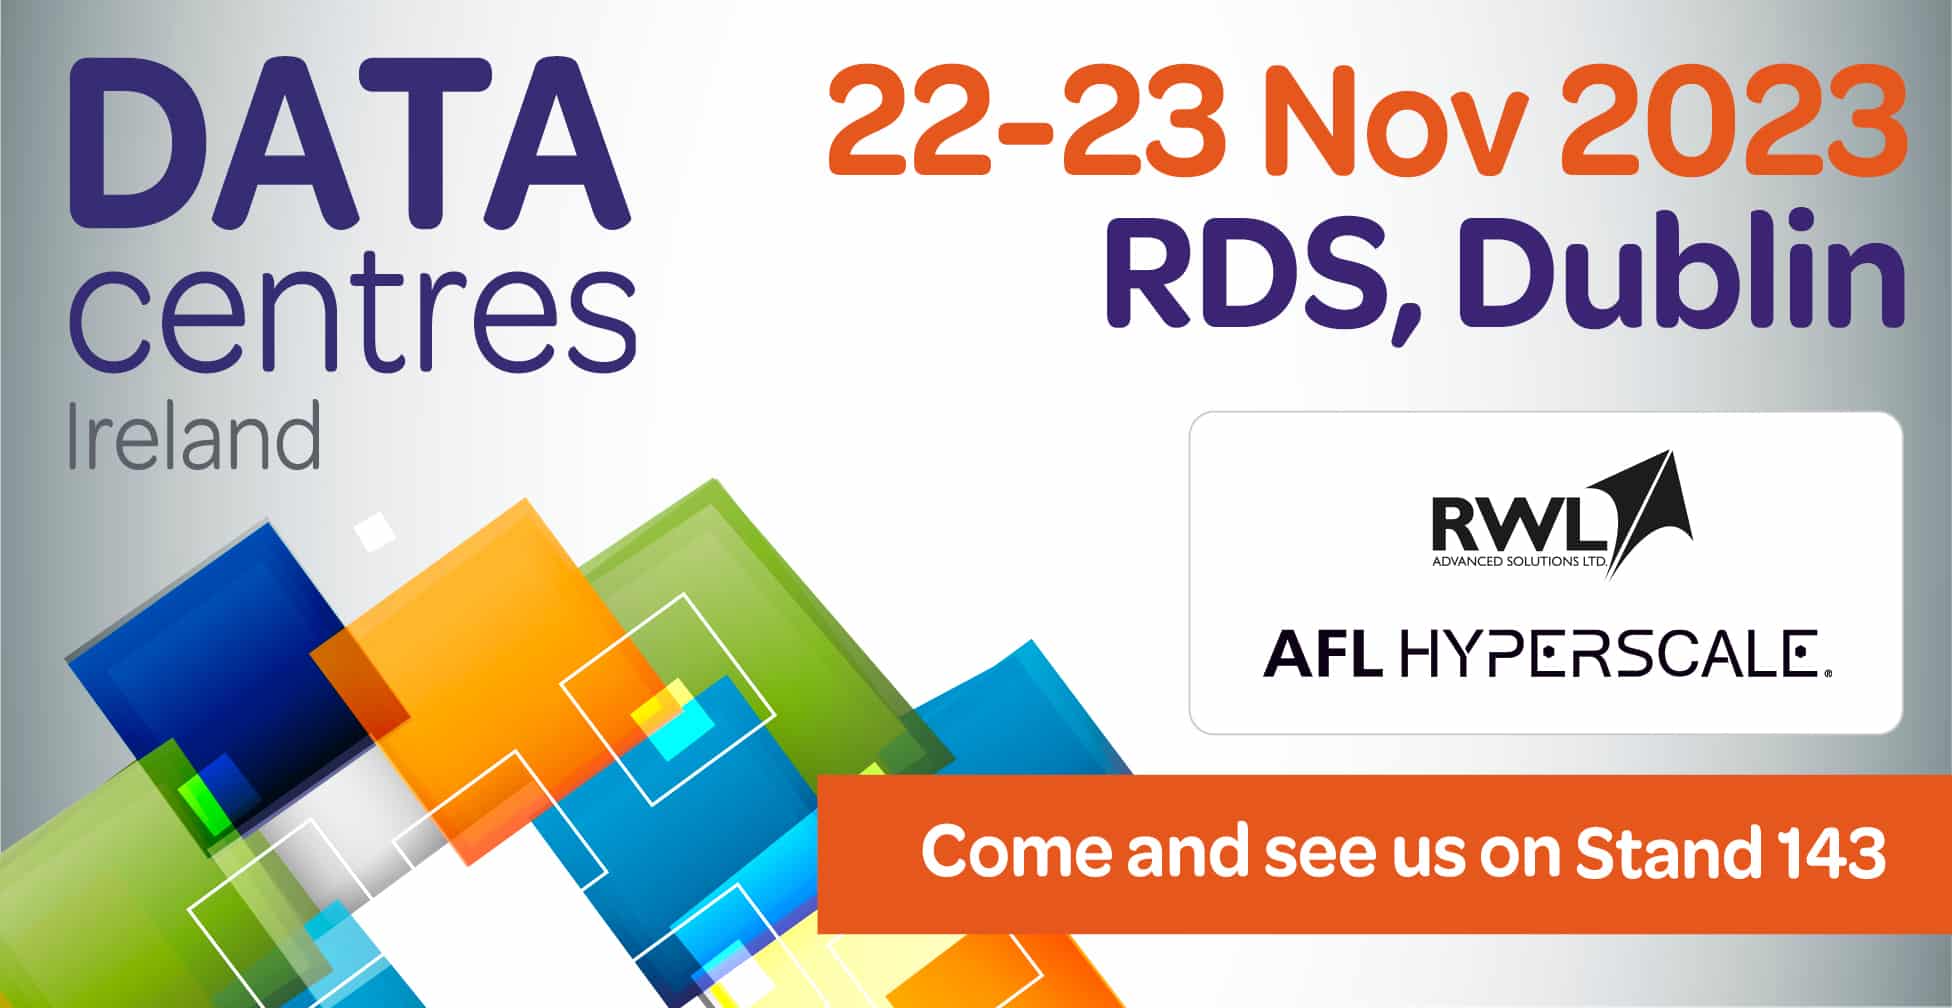 AFL Hyperscale and RWL Advanced Solutions unite for DataCentres Ireland